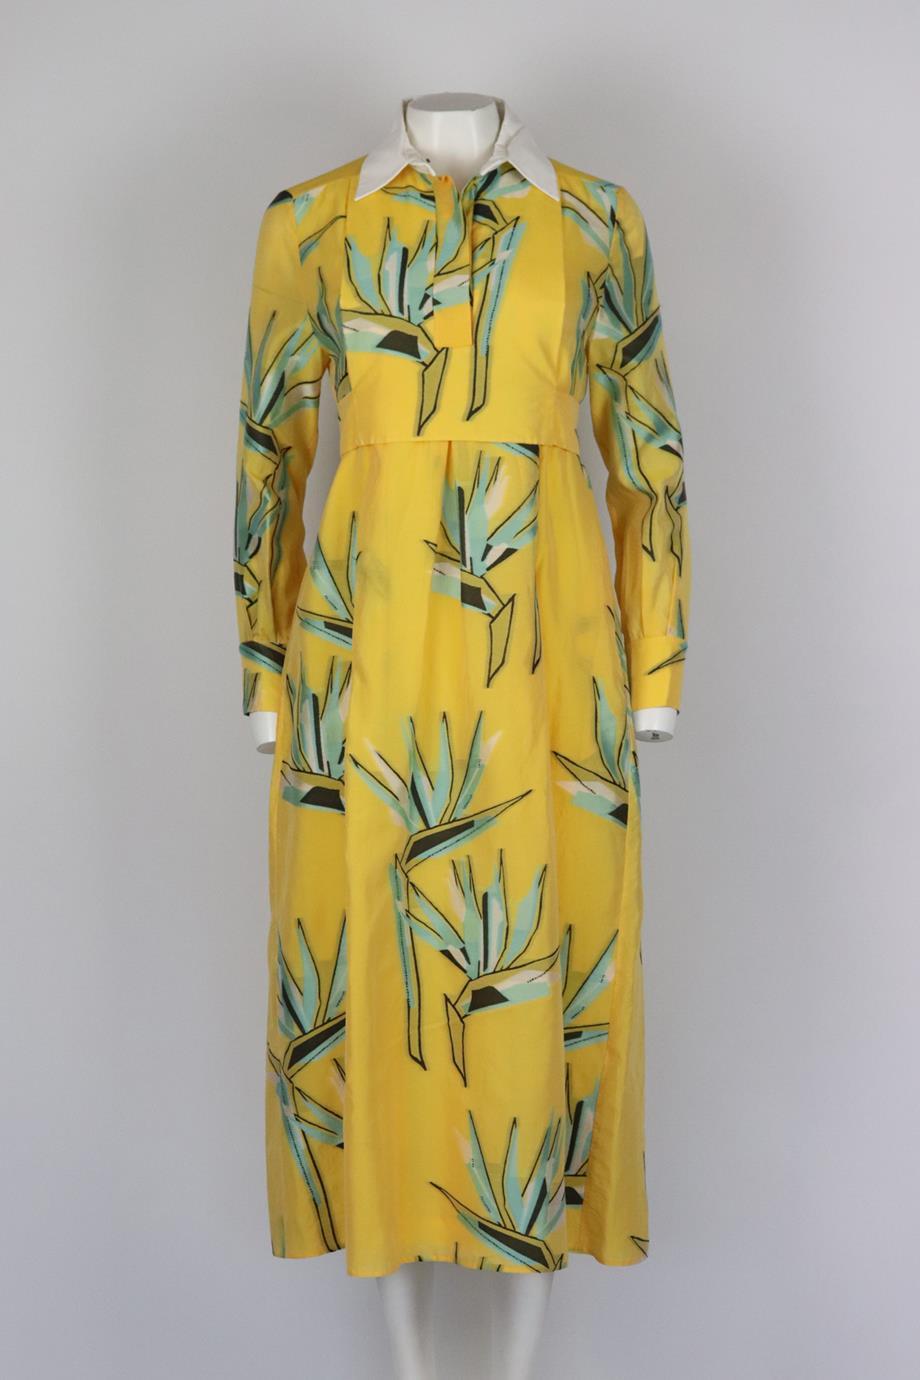 Fendi jacquard cotton blend midi dress. Yellow, Green, Black & White. Long sleeve, crew neck. Slips on. 50% Cotton, 32% silk, 18% polyester; lining: 100% cotton. Size: IT 40 (UK 8, US 4, FR 36). Bust: 39 in. Waist: 41 in. Hips: 56 in. Length: 50 in.